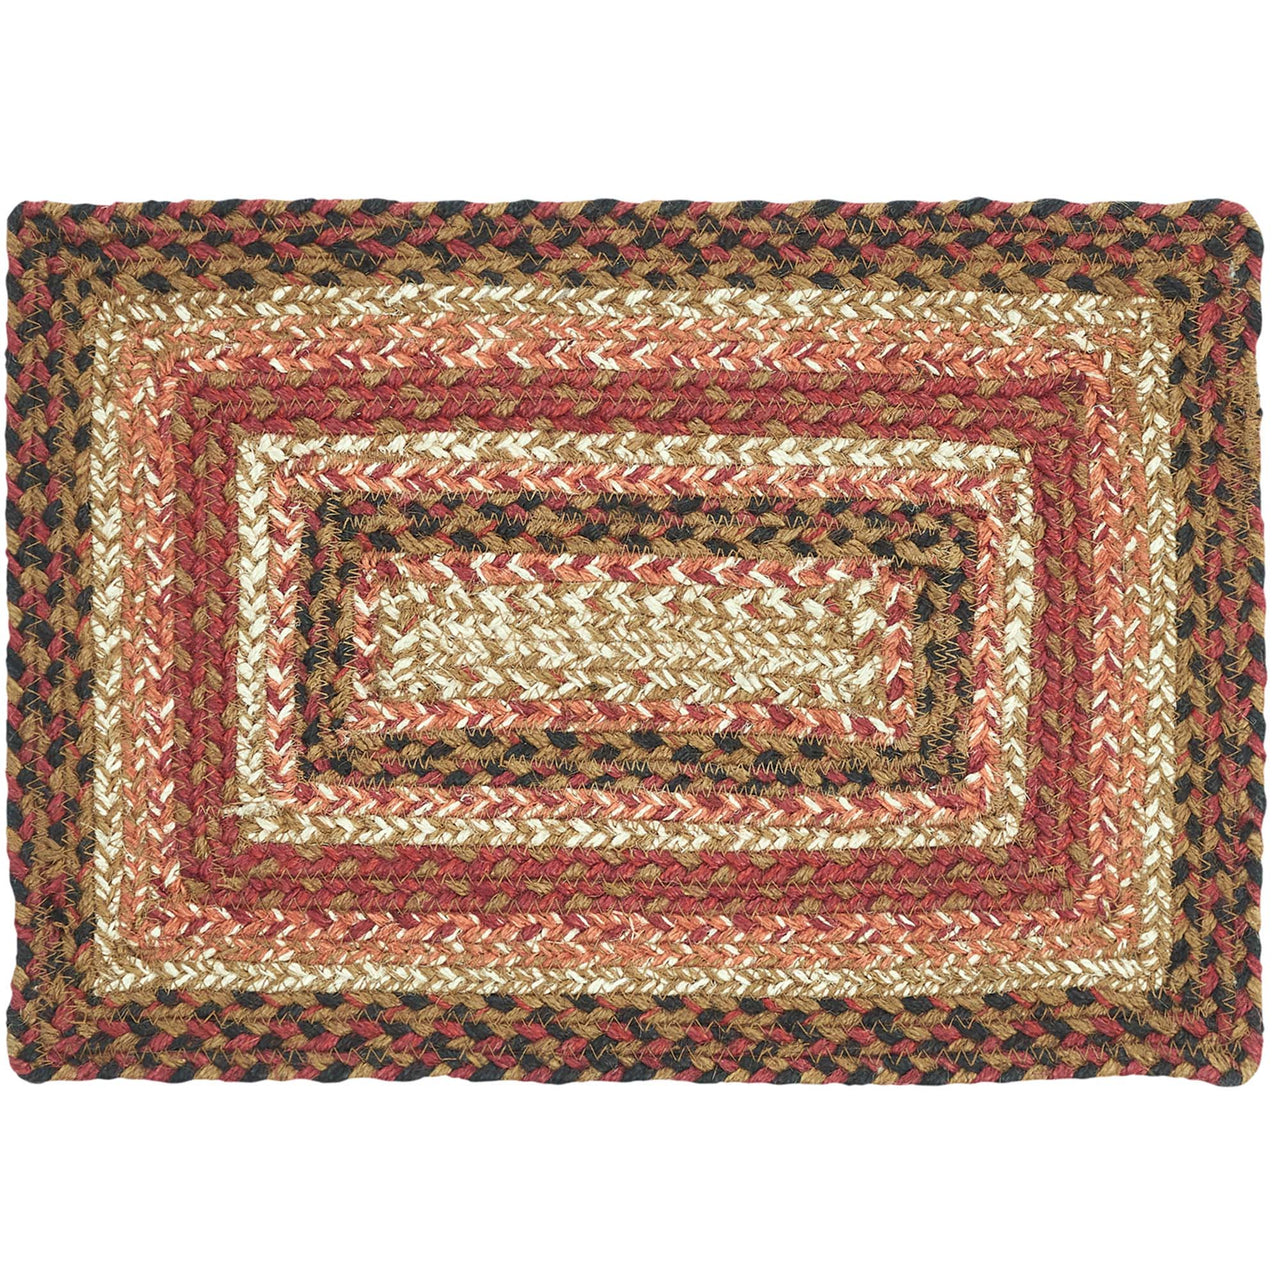 Ginger Spice Jute Braided Rect Placemat 10"x15" VHC Brands